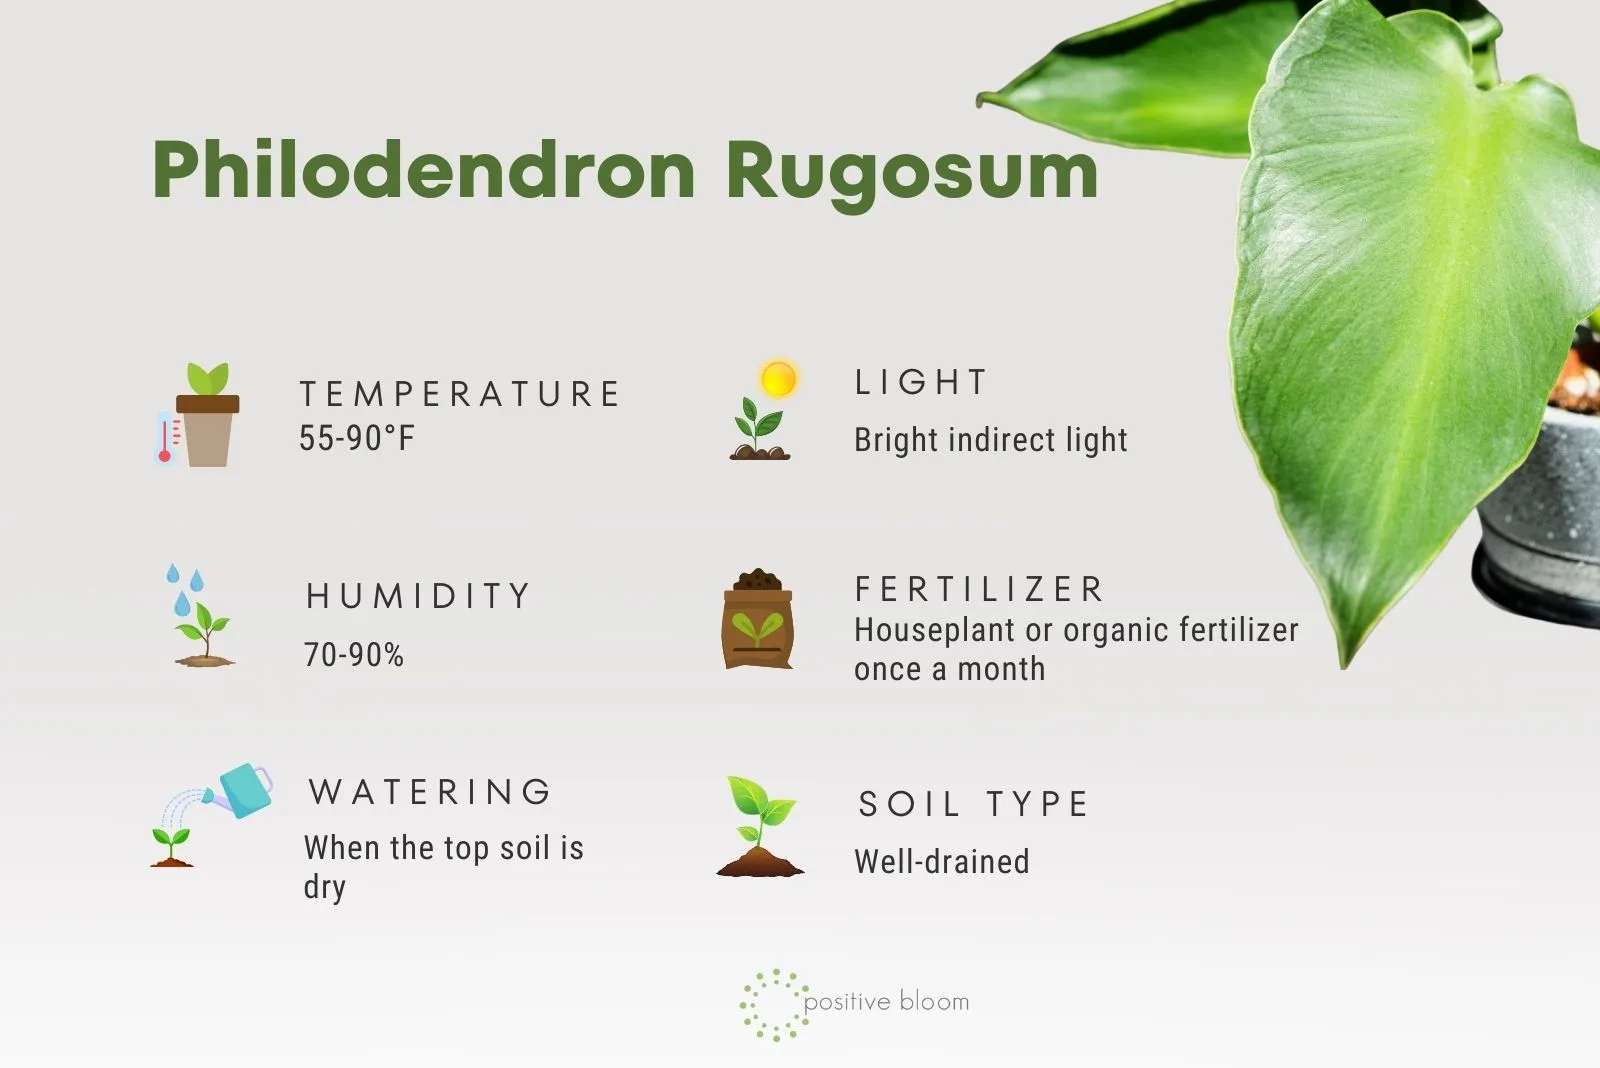 Philodendron Rugosum care